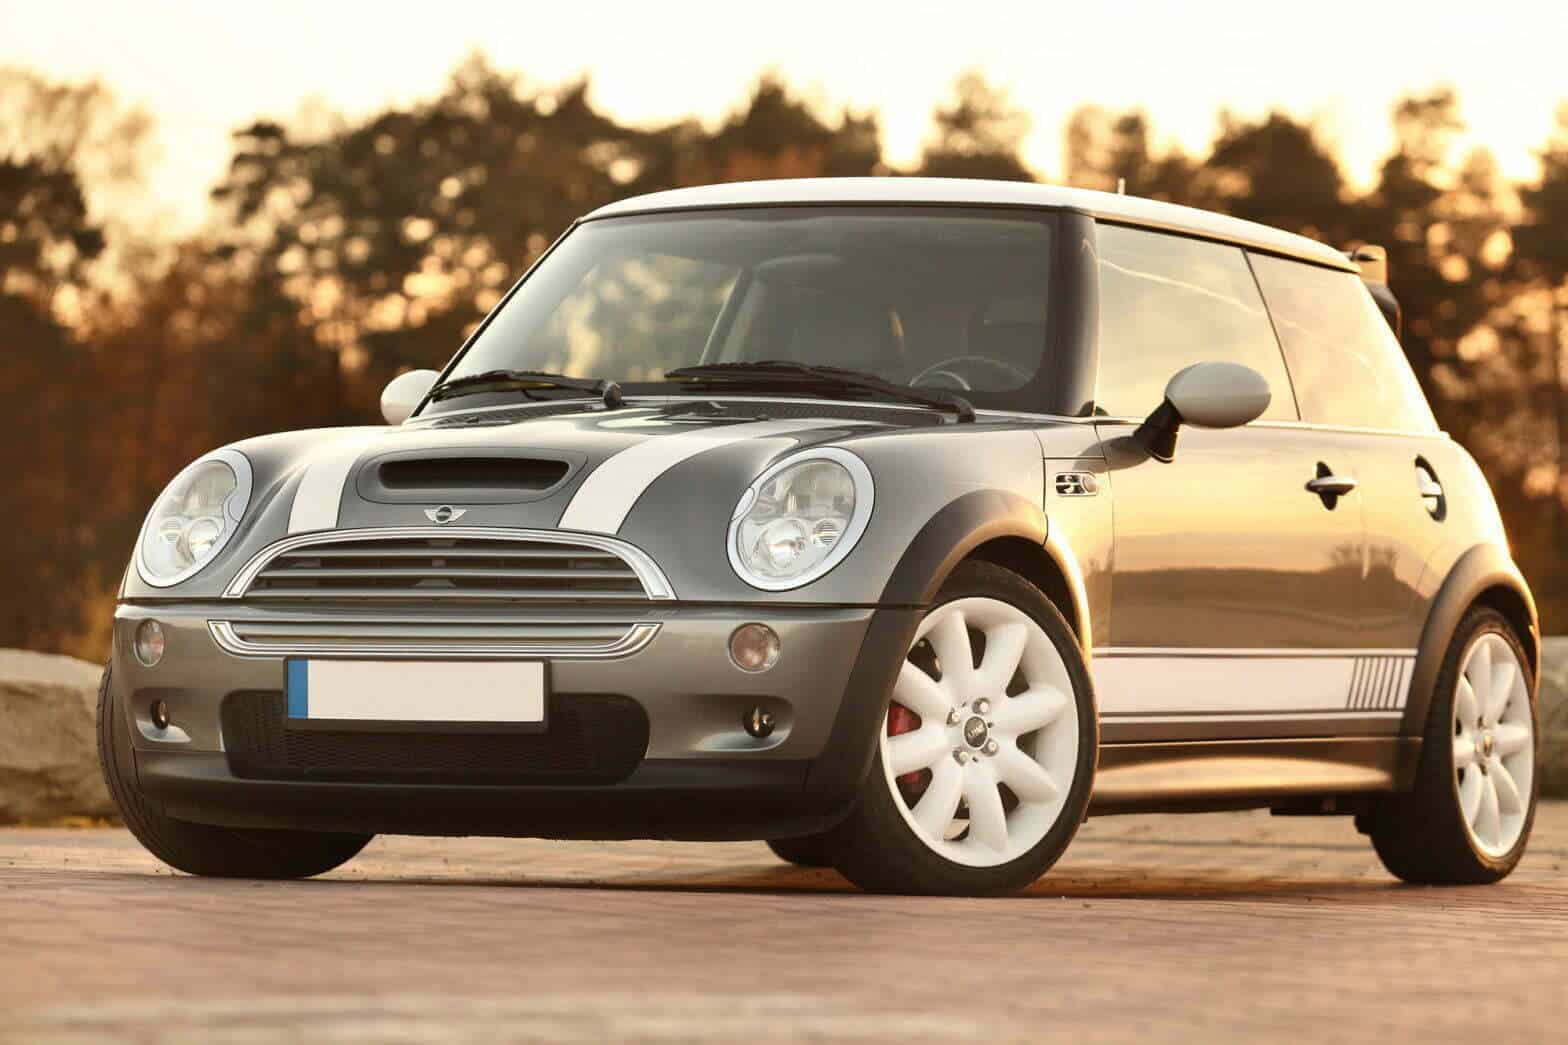 Are mini coopers reliable?